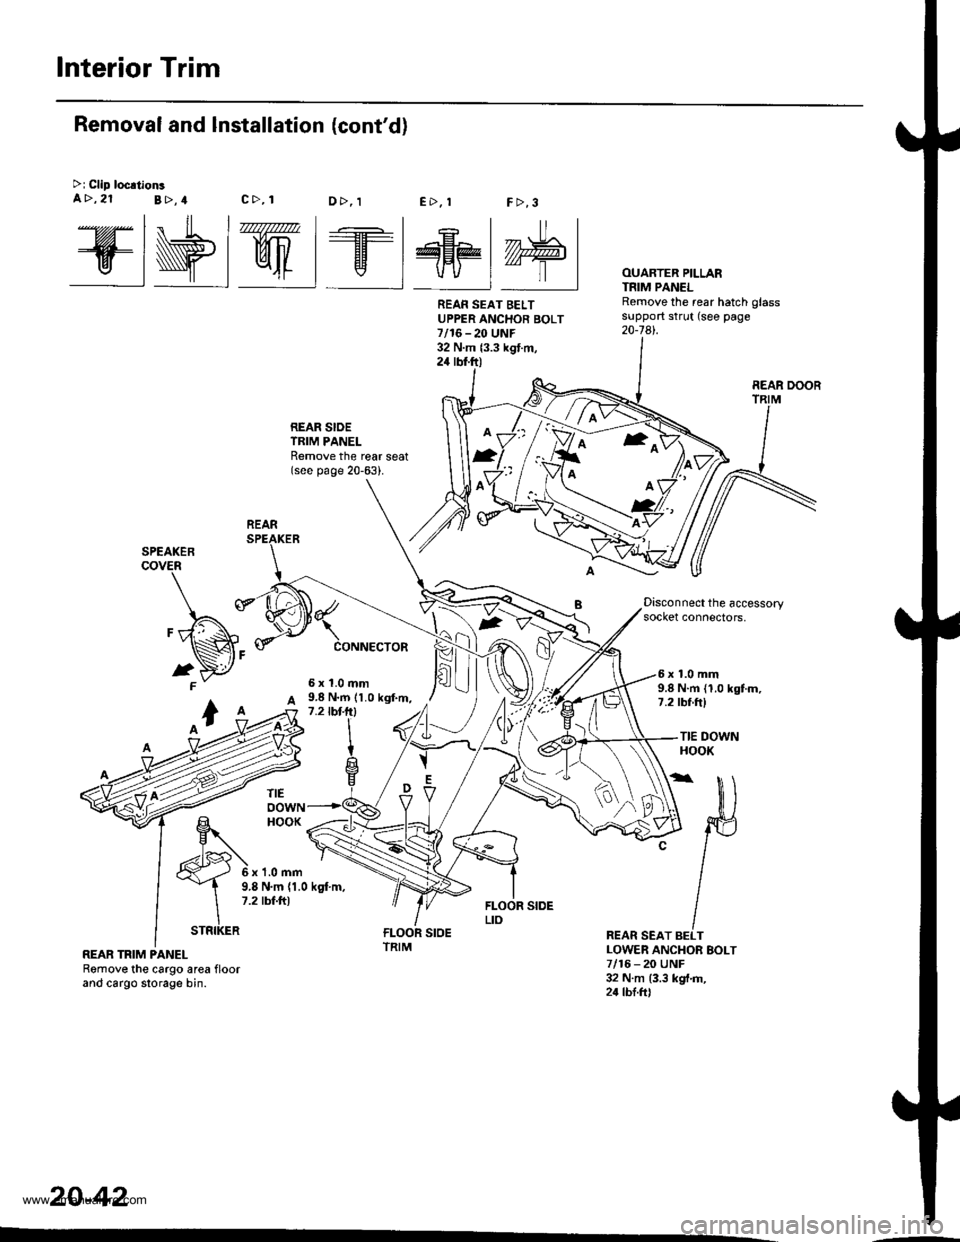 HONDA CR-V 1999 RD1-RD3 / 1.G Workshop Manual 
Interior Trim
@wt we@M
REAR SIOETRIM PANELRemove the reat seat(see page 20-63).
FCONNECTOR
2
OUARTER PILLARTNIM PANELRemove the rear hatch glasssupport strut (see page20-741.
Removal and Installation